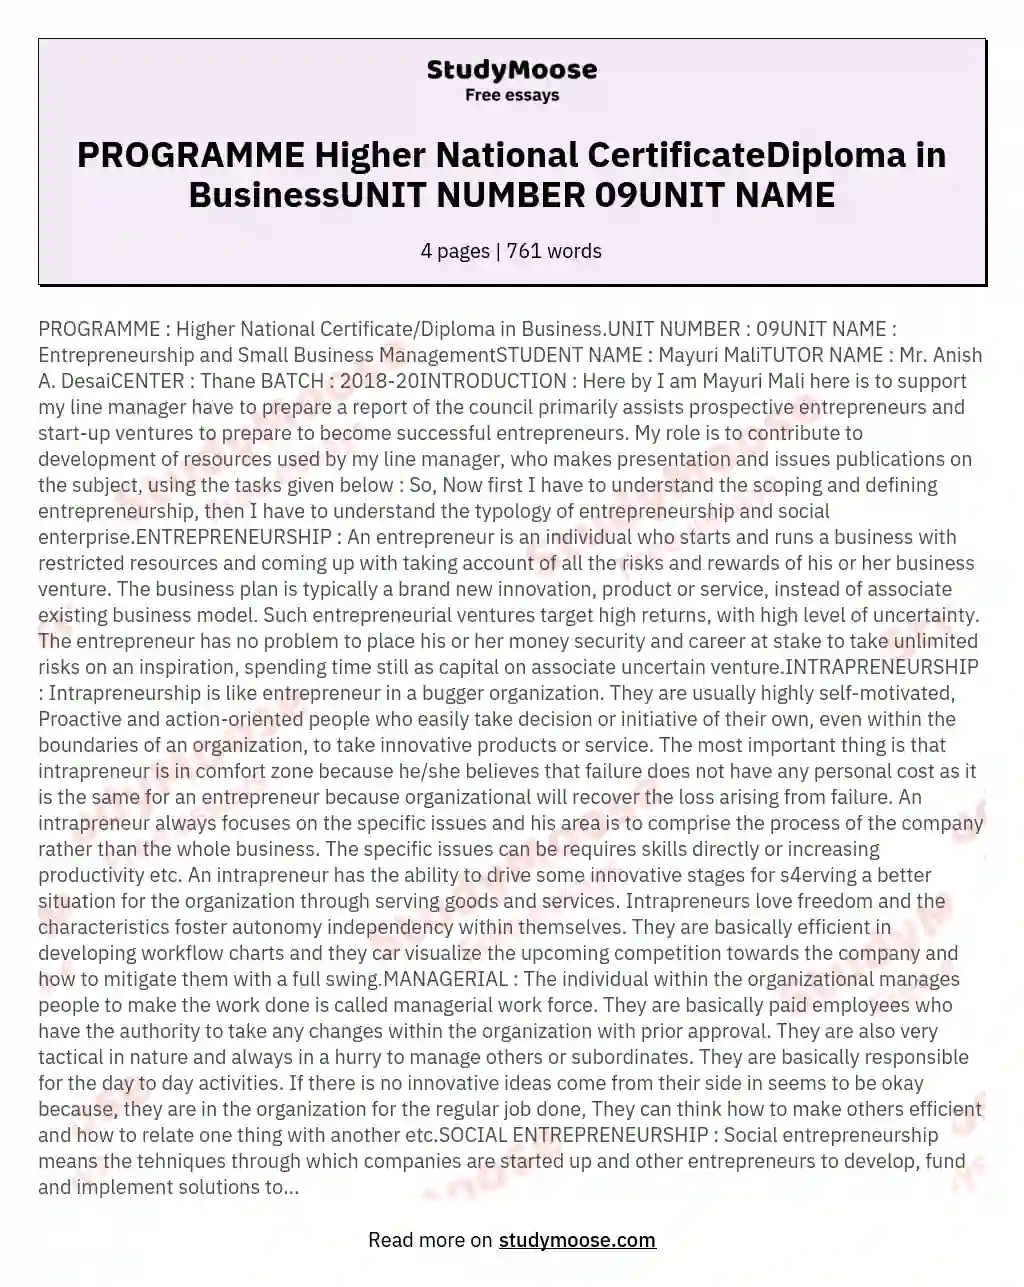 PROGRAMME Higher National CertificateDiploma in BusinessUNIT NUMBER 09UNIT NAME